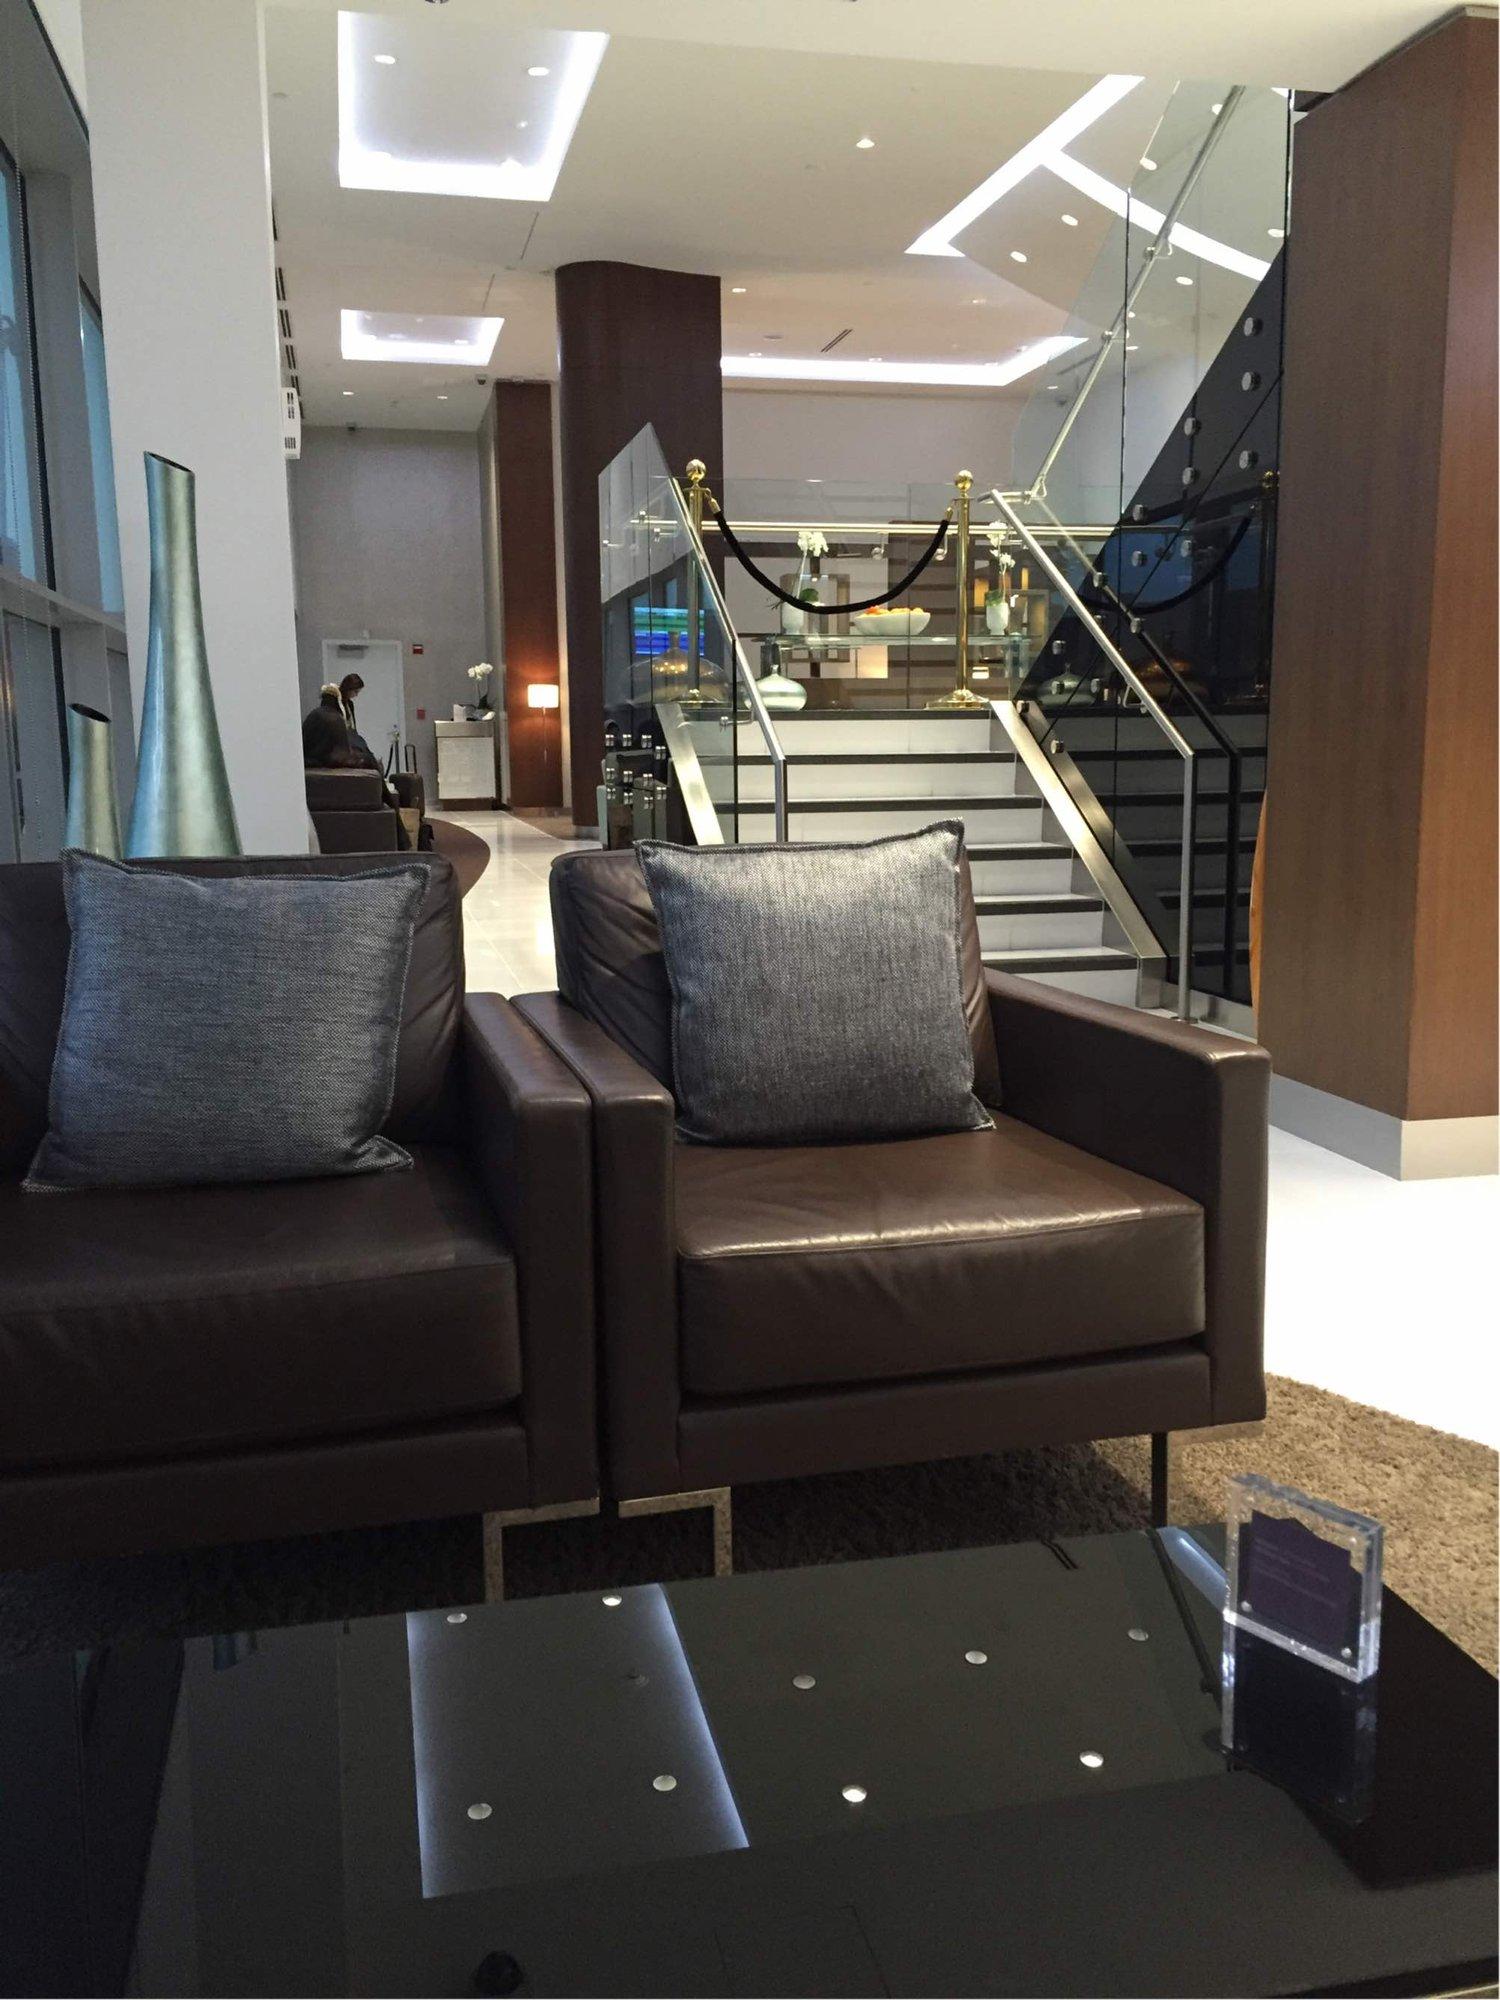 Etihad Airways First & Business Class Lounge image 5 of 17